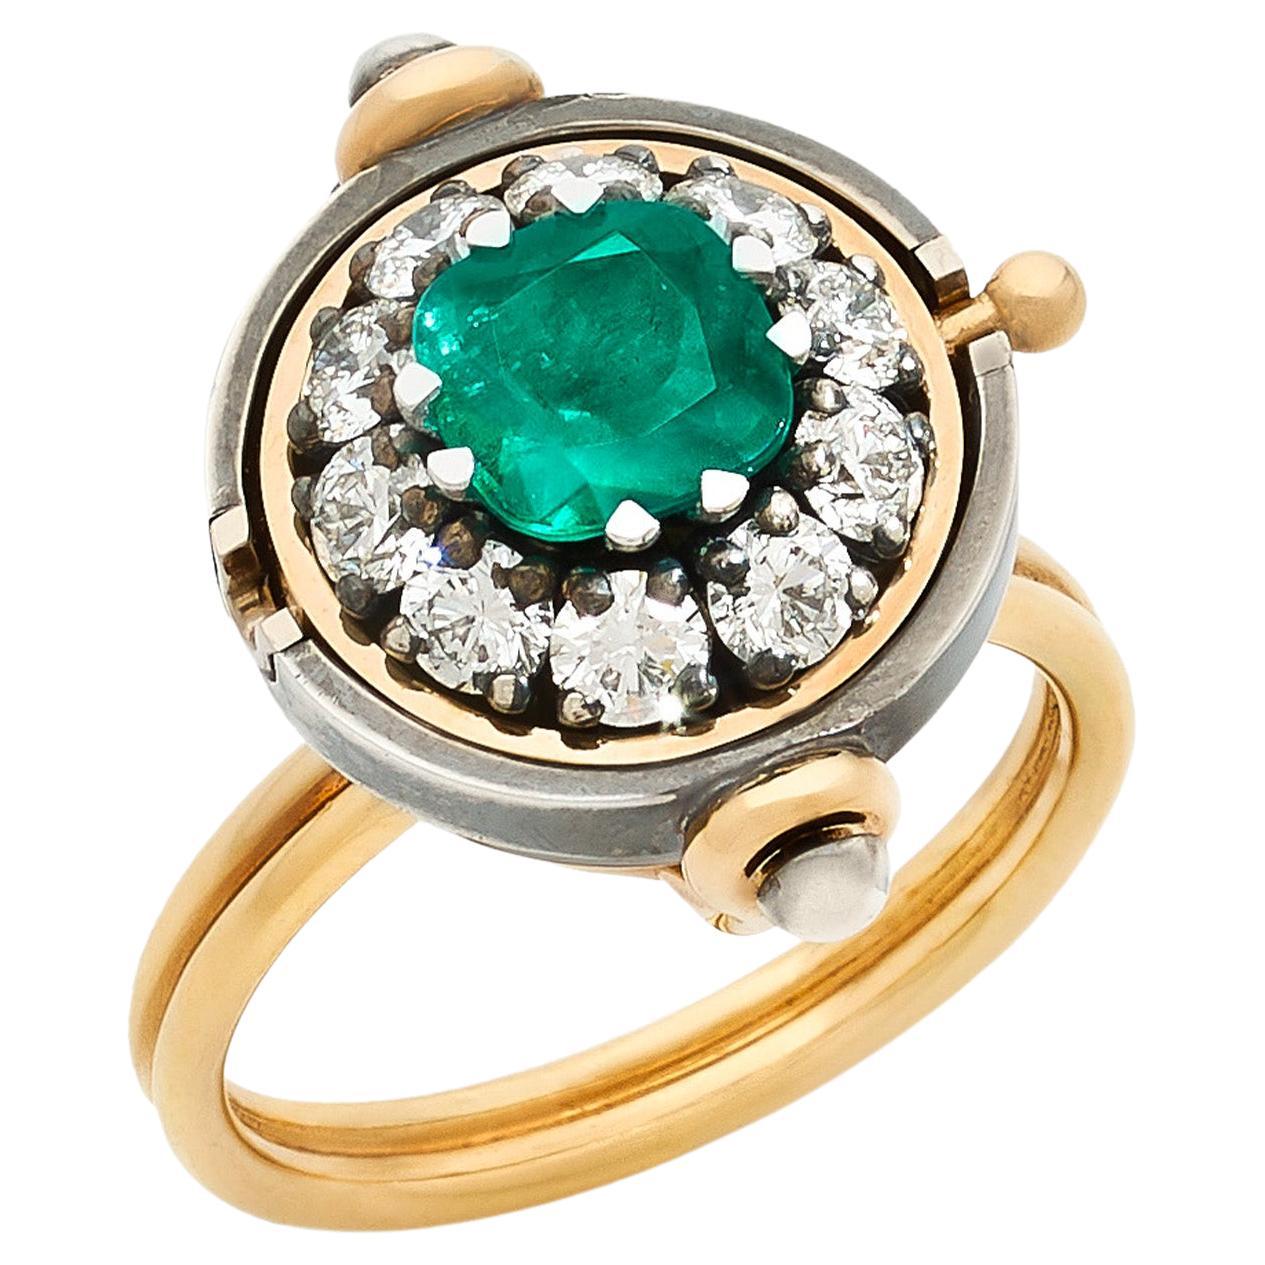 Medium Emerald & Diamonds Sphere Ring in 18k Yellow Gold by Elie Top For Sale